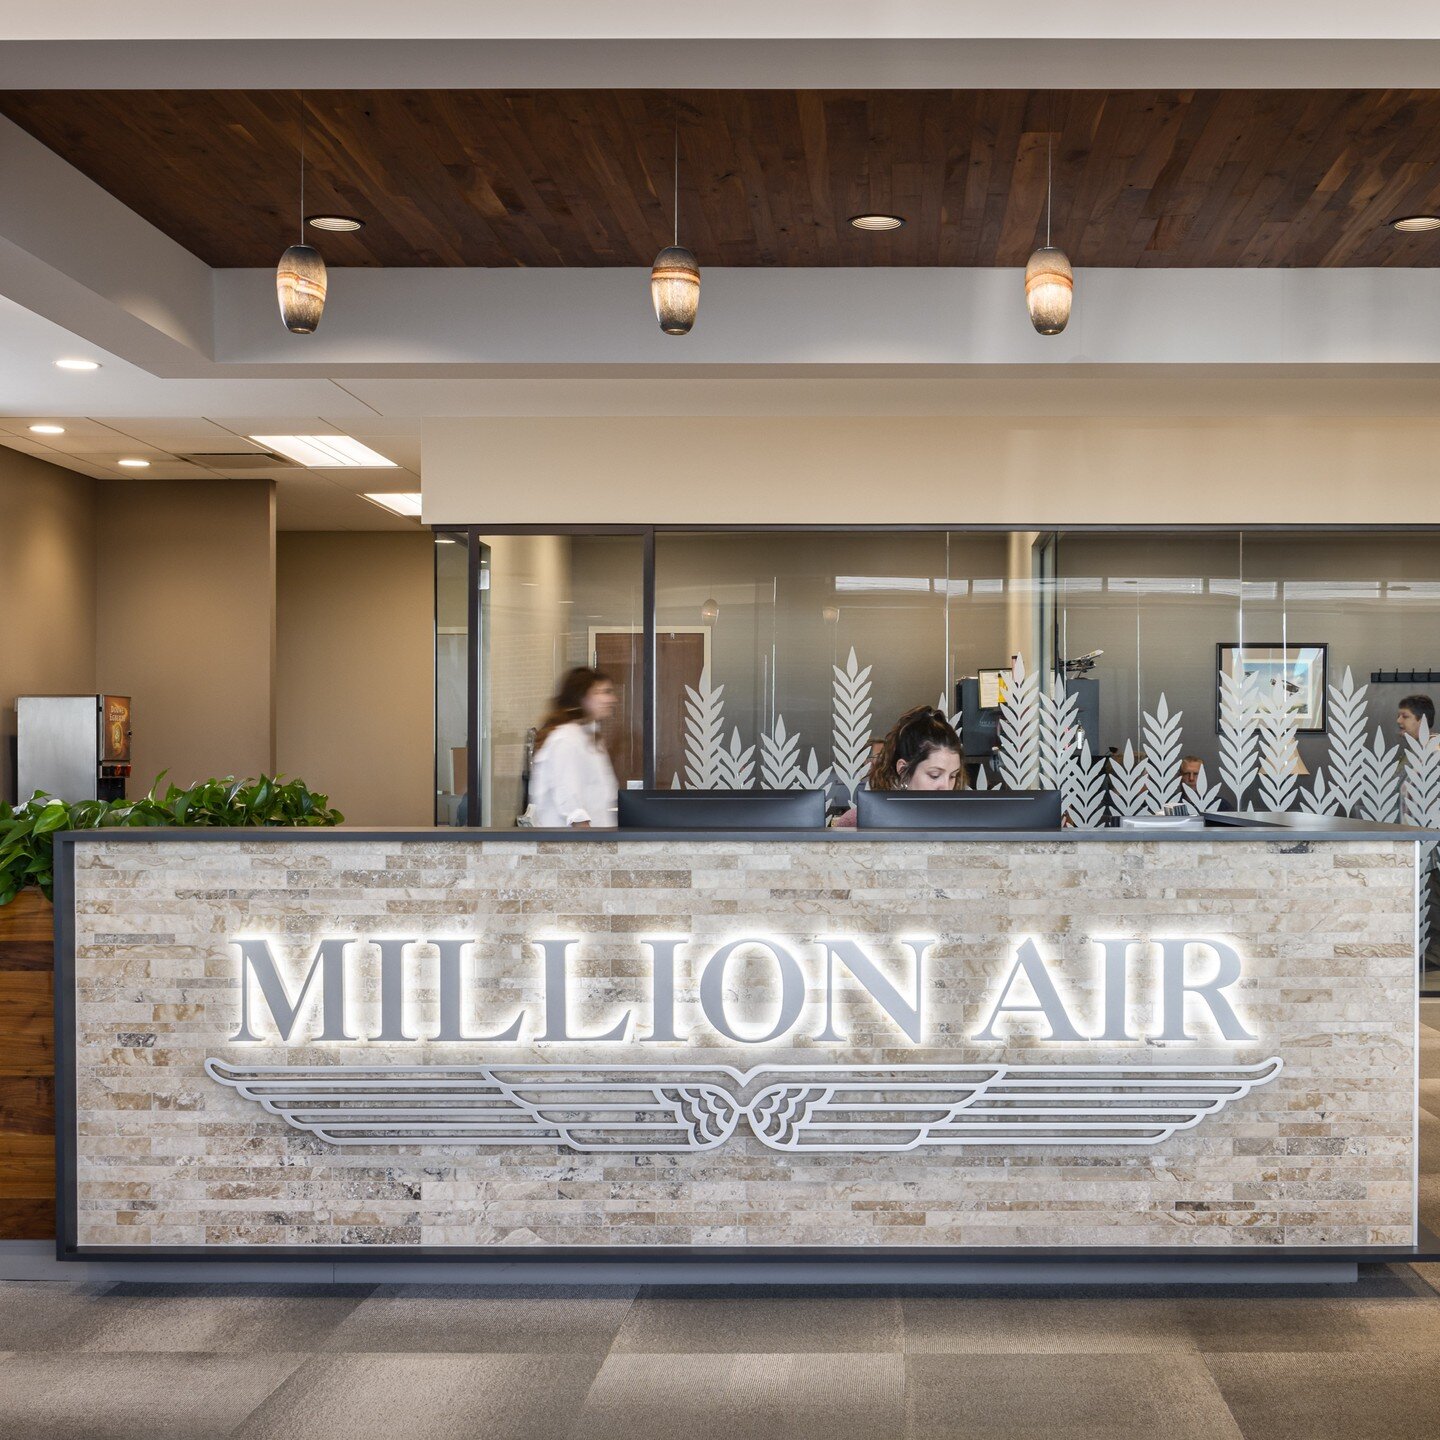 It's always so fun to see a design come together! 

Visit hivekc.com to see the rest of the photos of the finished project for Million Air Topeka, our latest FBO project. 

#HIVEdesign #reception #fbo #airport #architecture #kansascity #topeka #milli